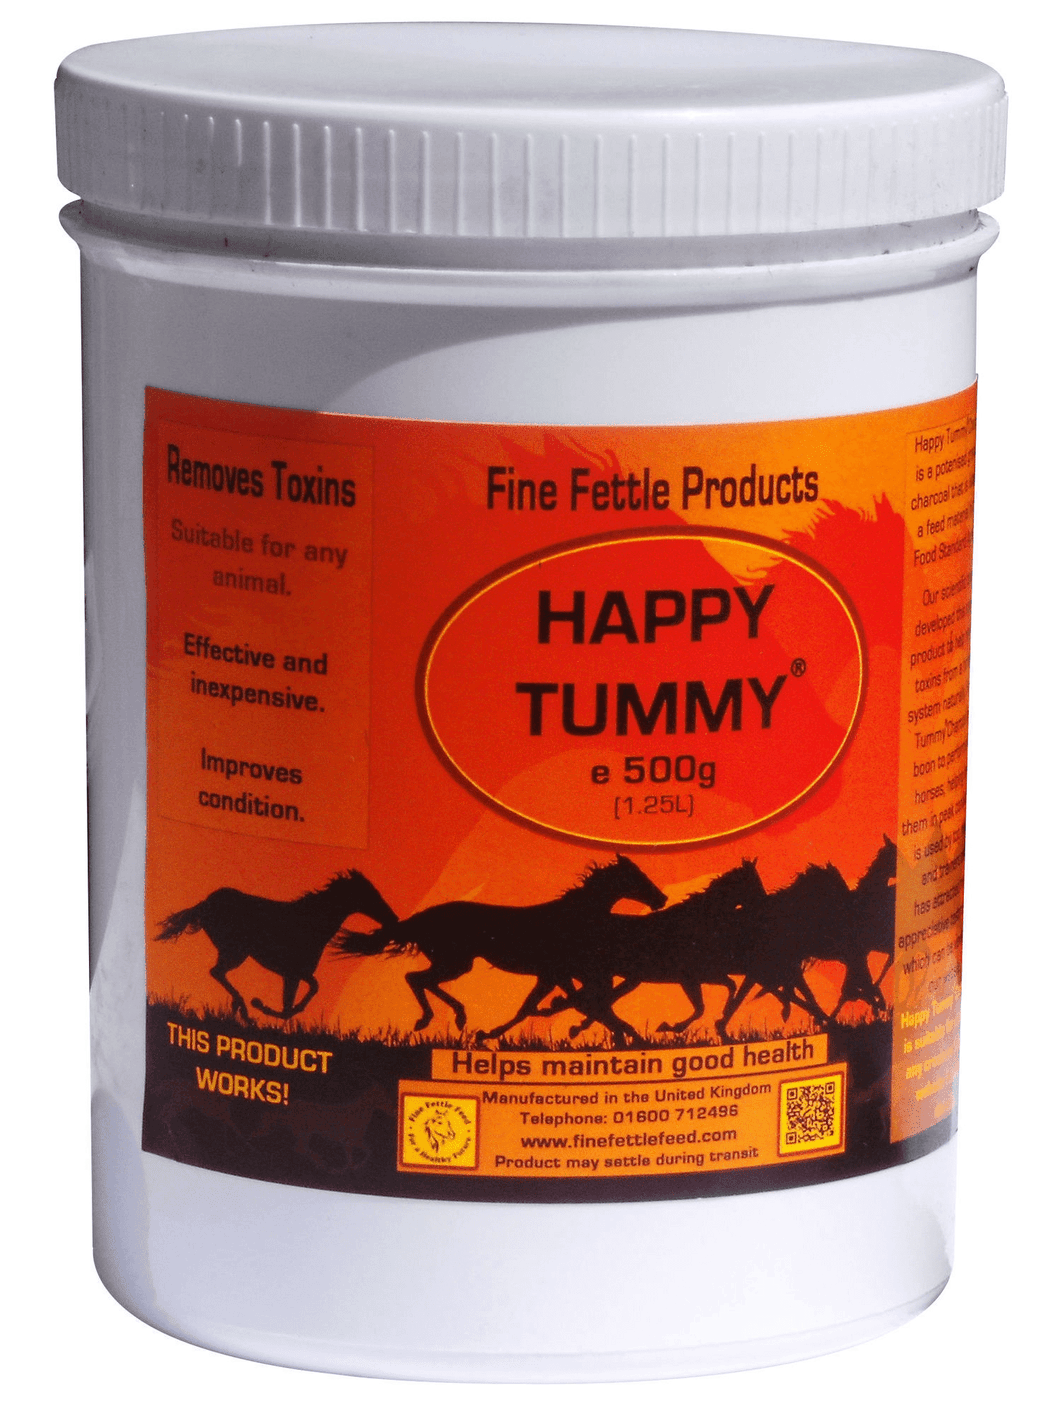 Fine fettle products - Happy Tummy